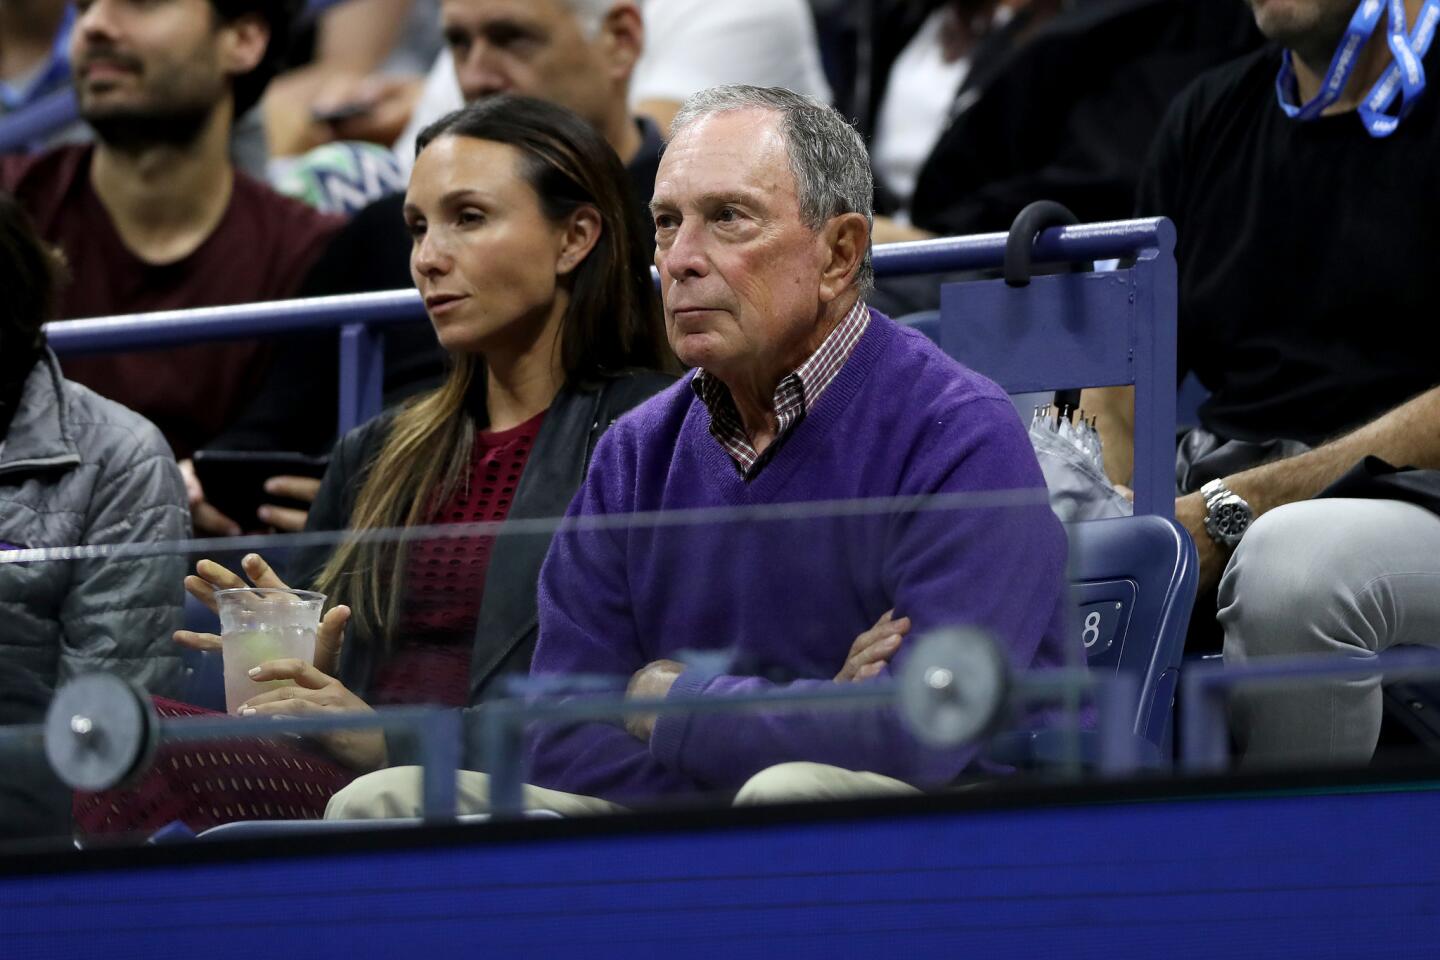 Former New York City mayor Michael Bloomberg (r.) watches the Men's Singles semi-final match between Daniil Medvedev of Russia and Grigor Dimitrov of Bulgaria on day twelve of the 2019 US Open on Sept. 6, 2019 in Queens, New York.